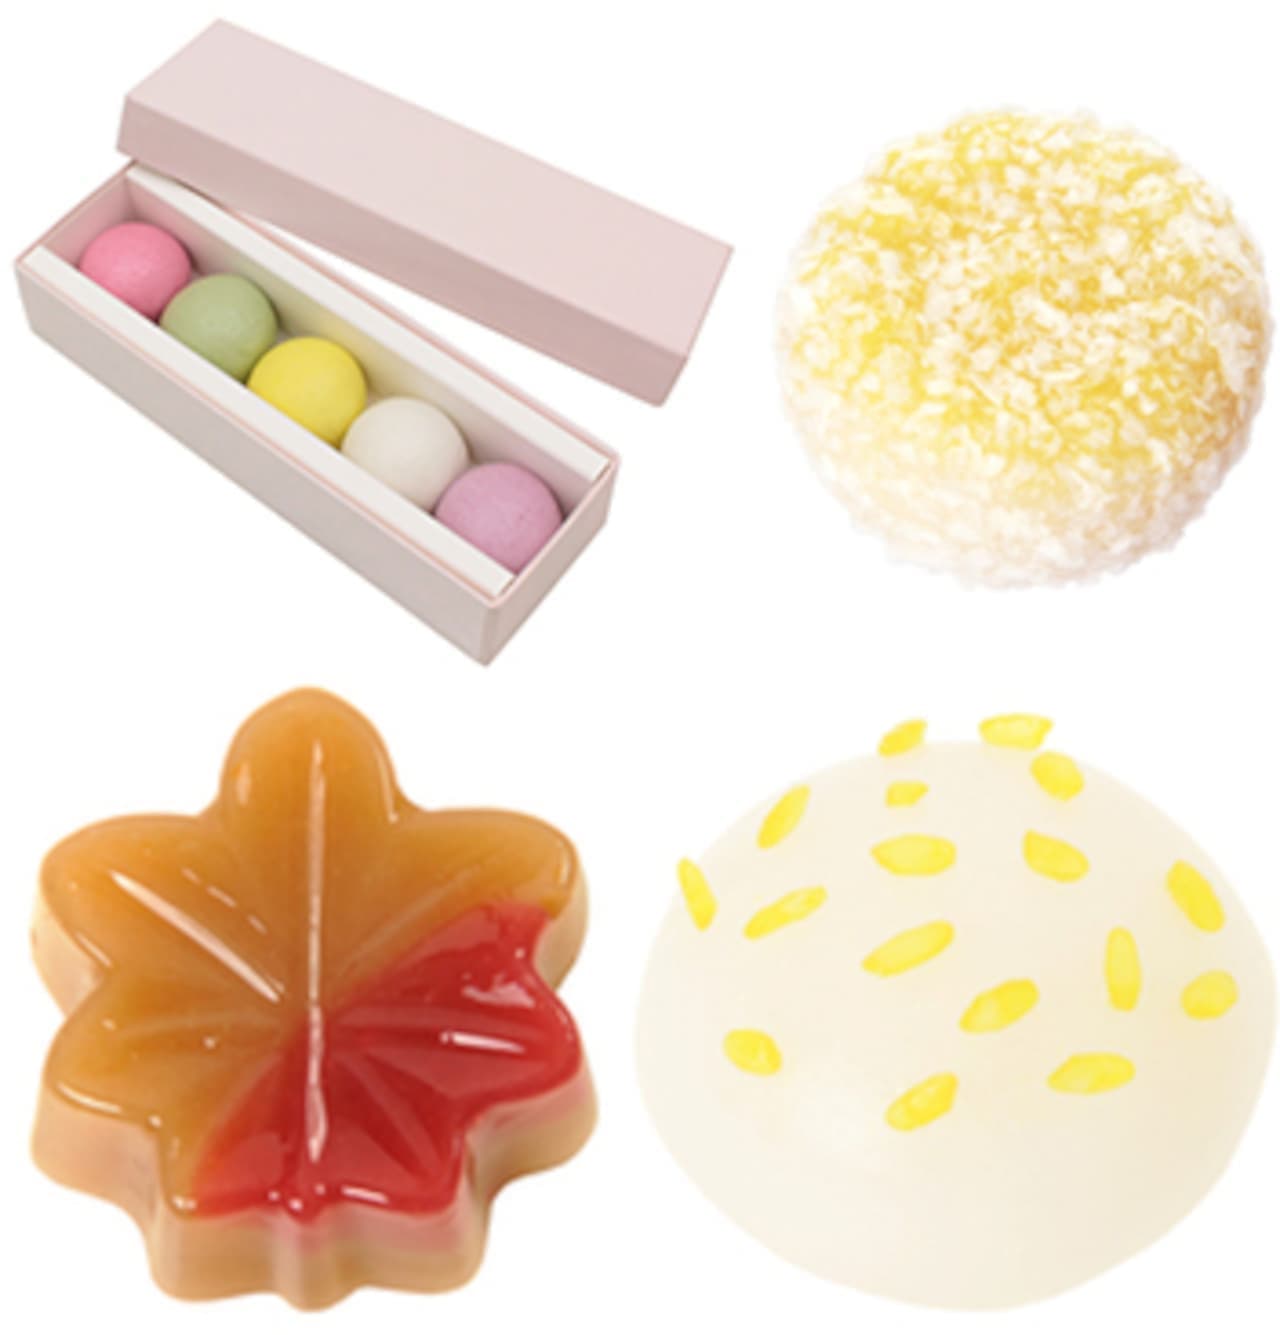 Four kinds of Toraya fresh confections